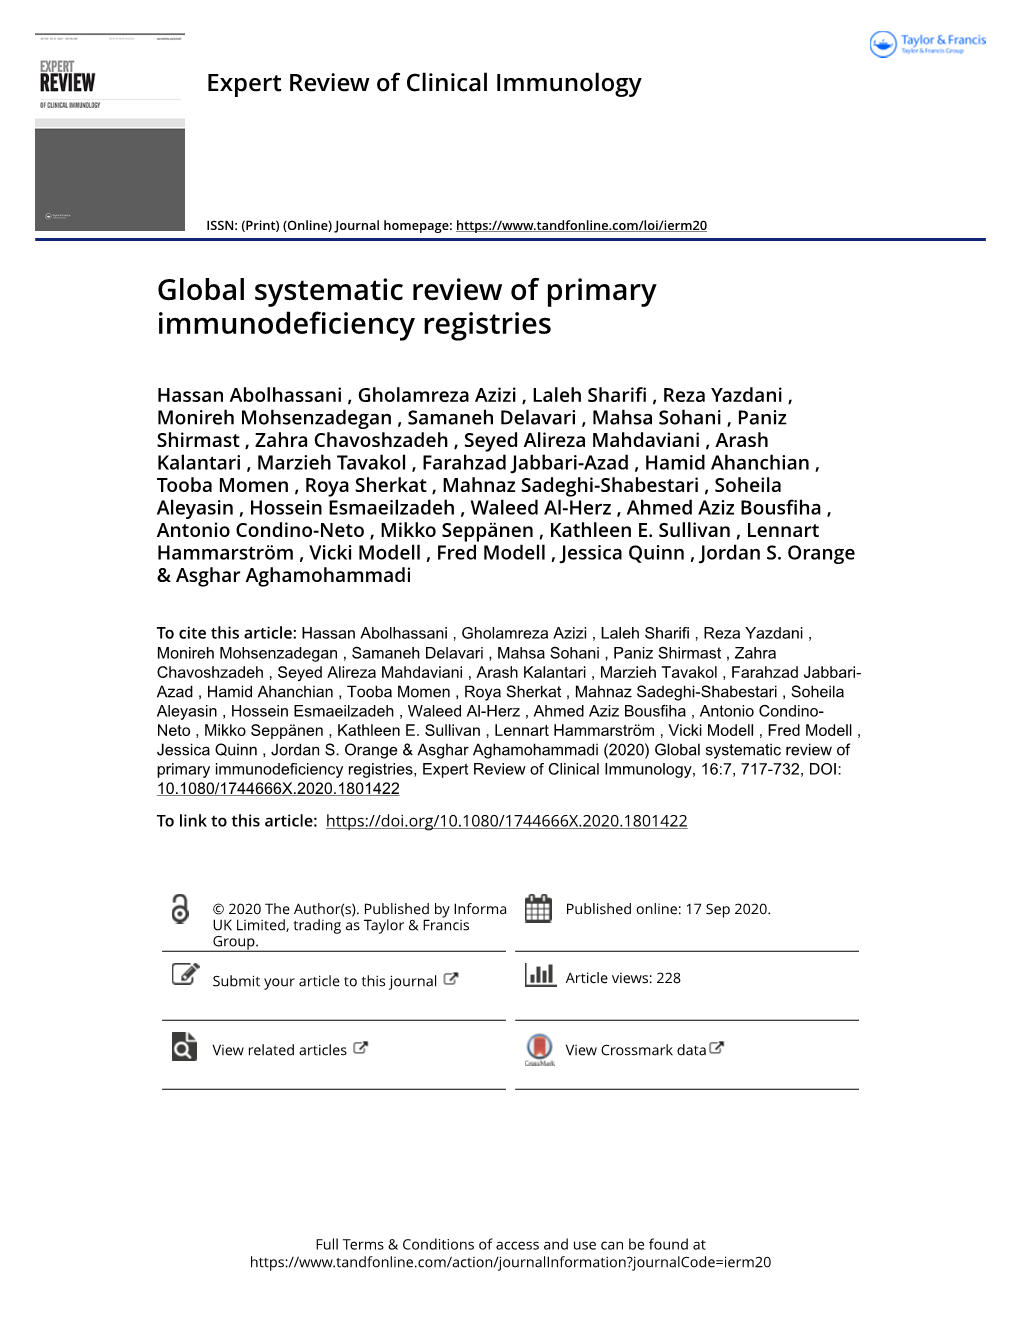 Global Systematic Review of Primary Immunodeficiency Registries